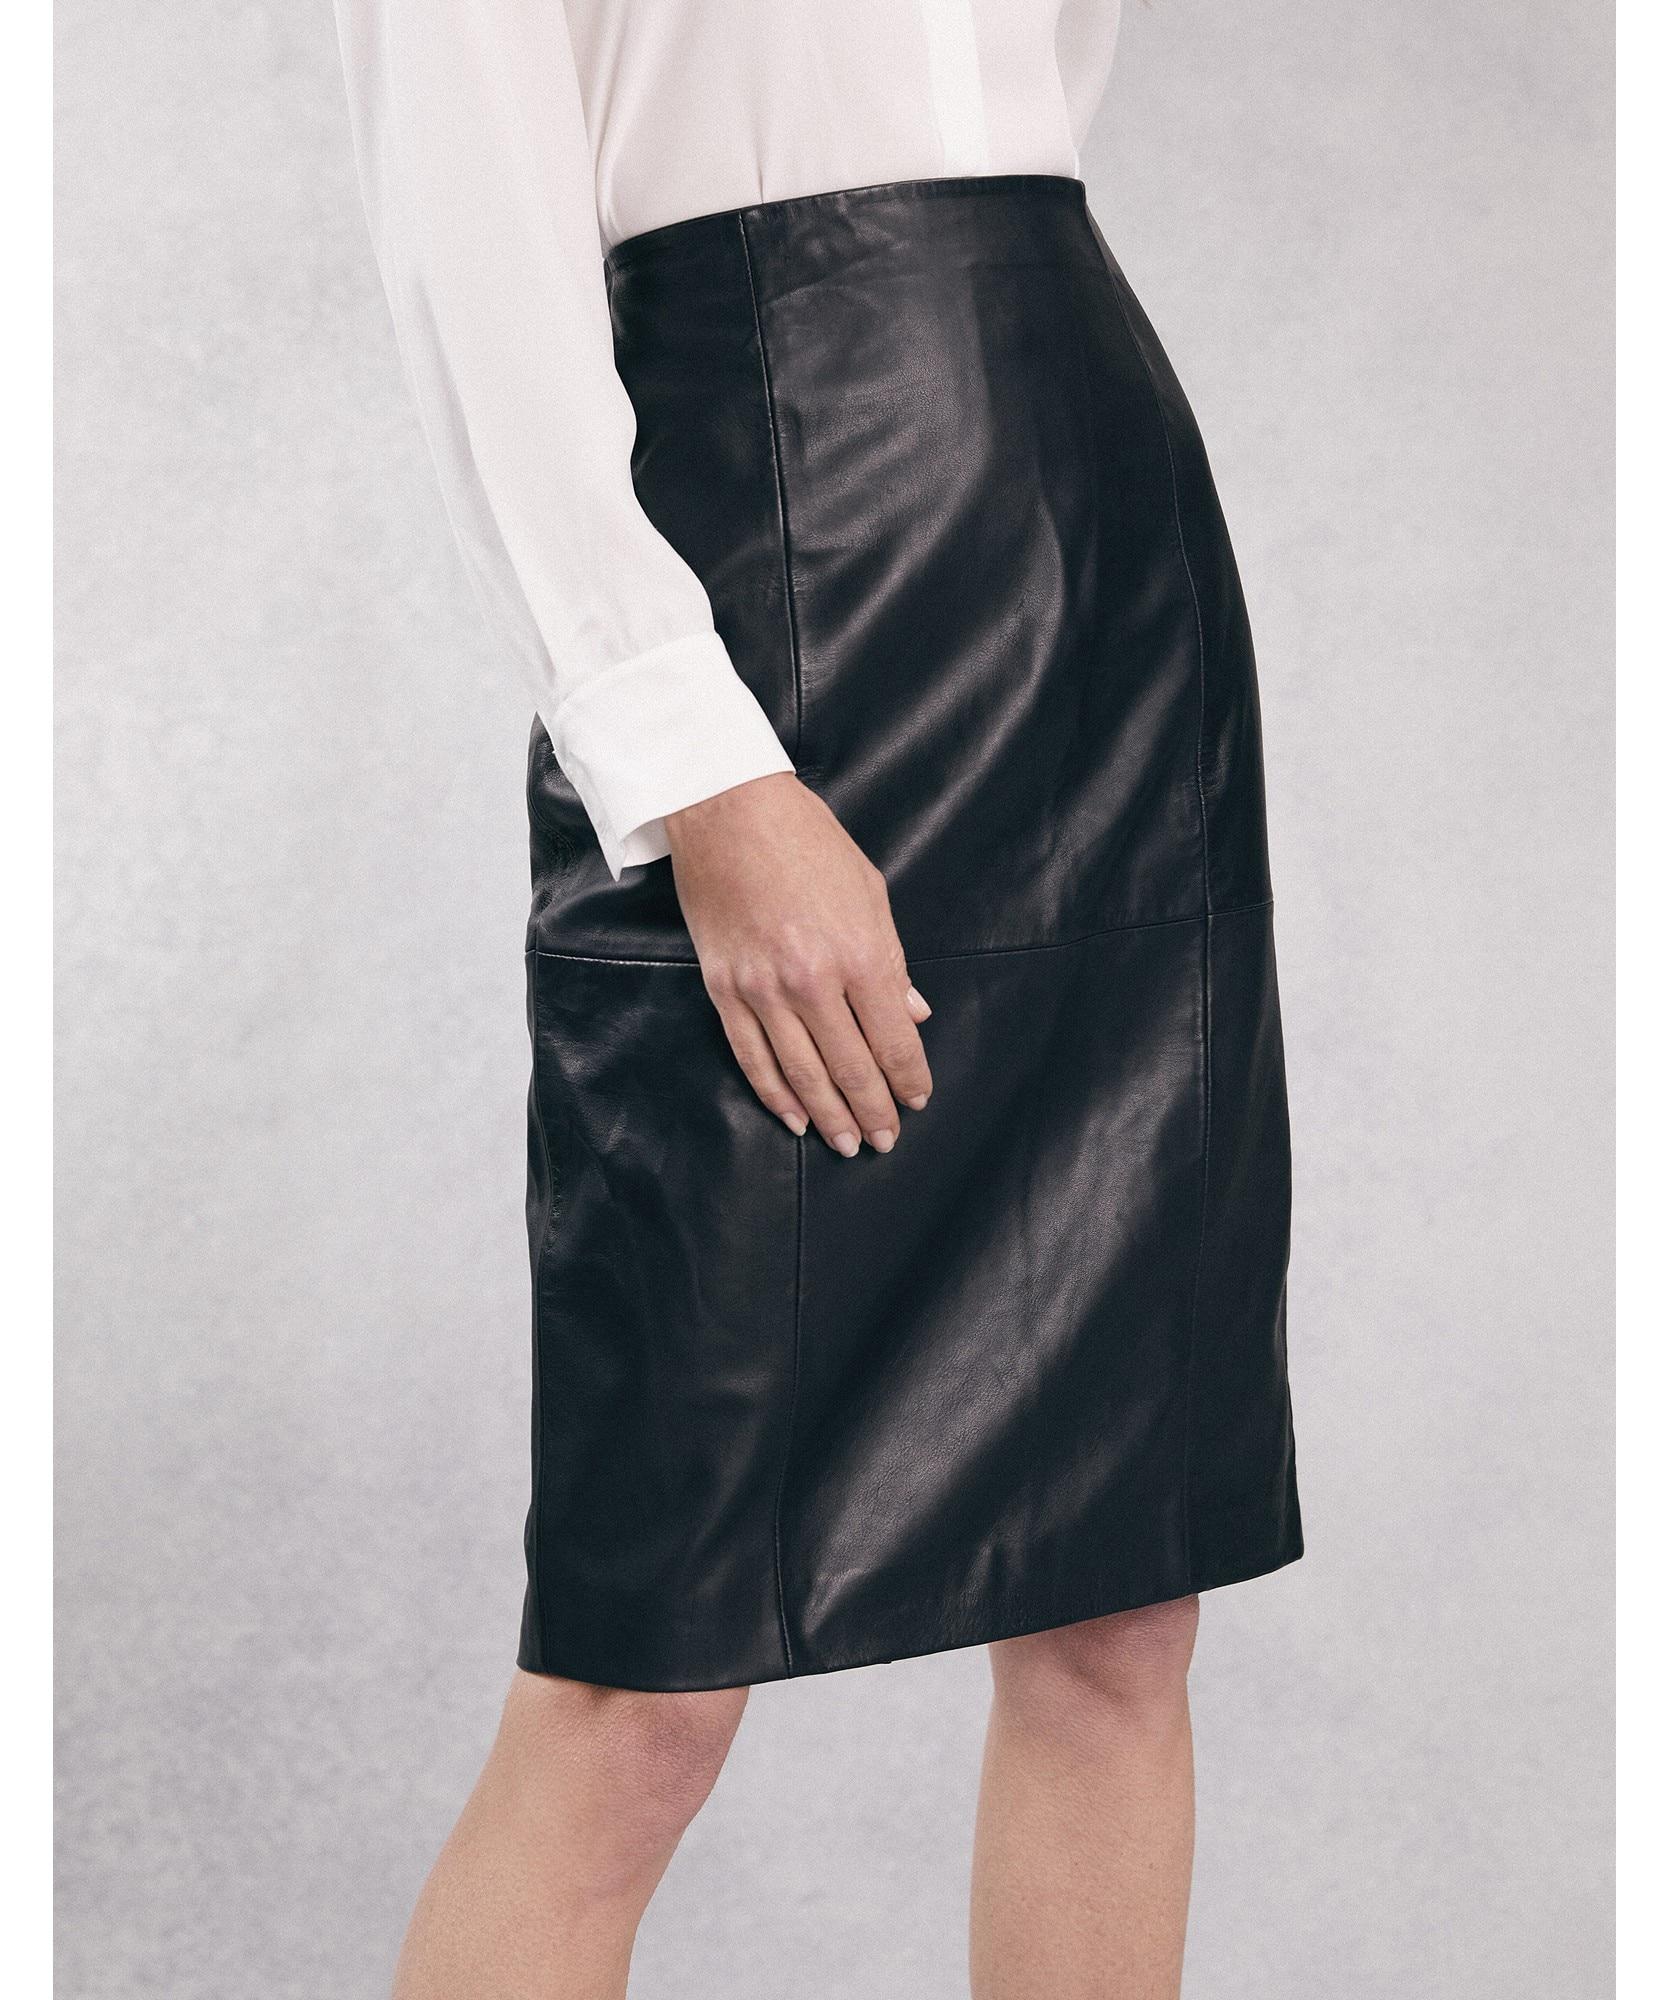 The White Company Leather Pencil Skirt in Black - Lyst